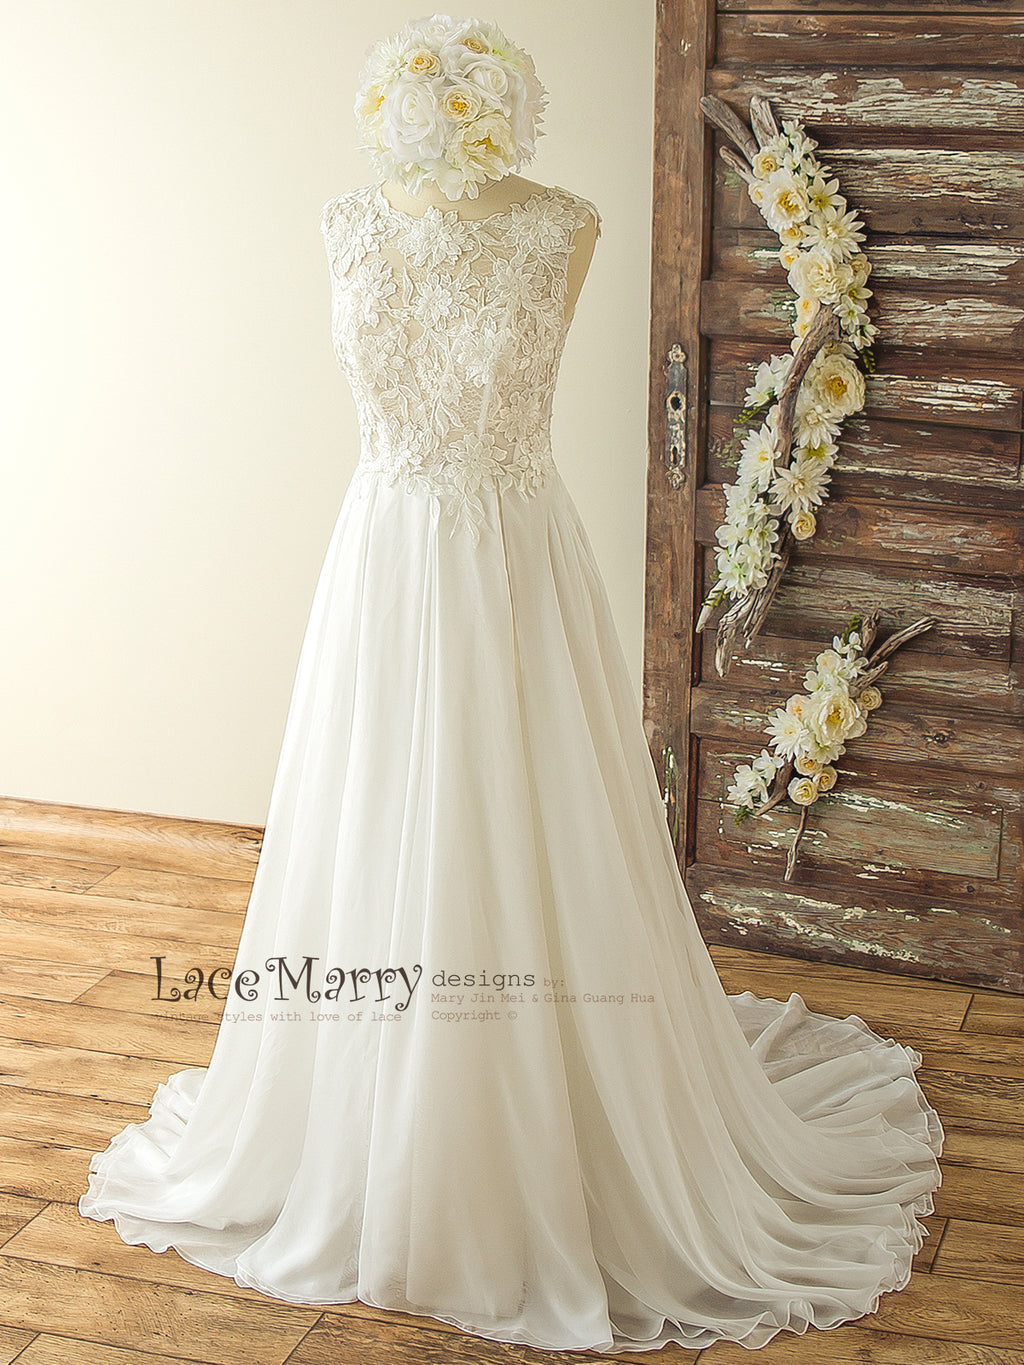 Lacemarry Handmade Wedding Dresses With Love Of Lace